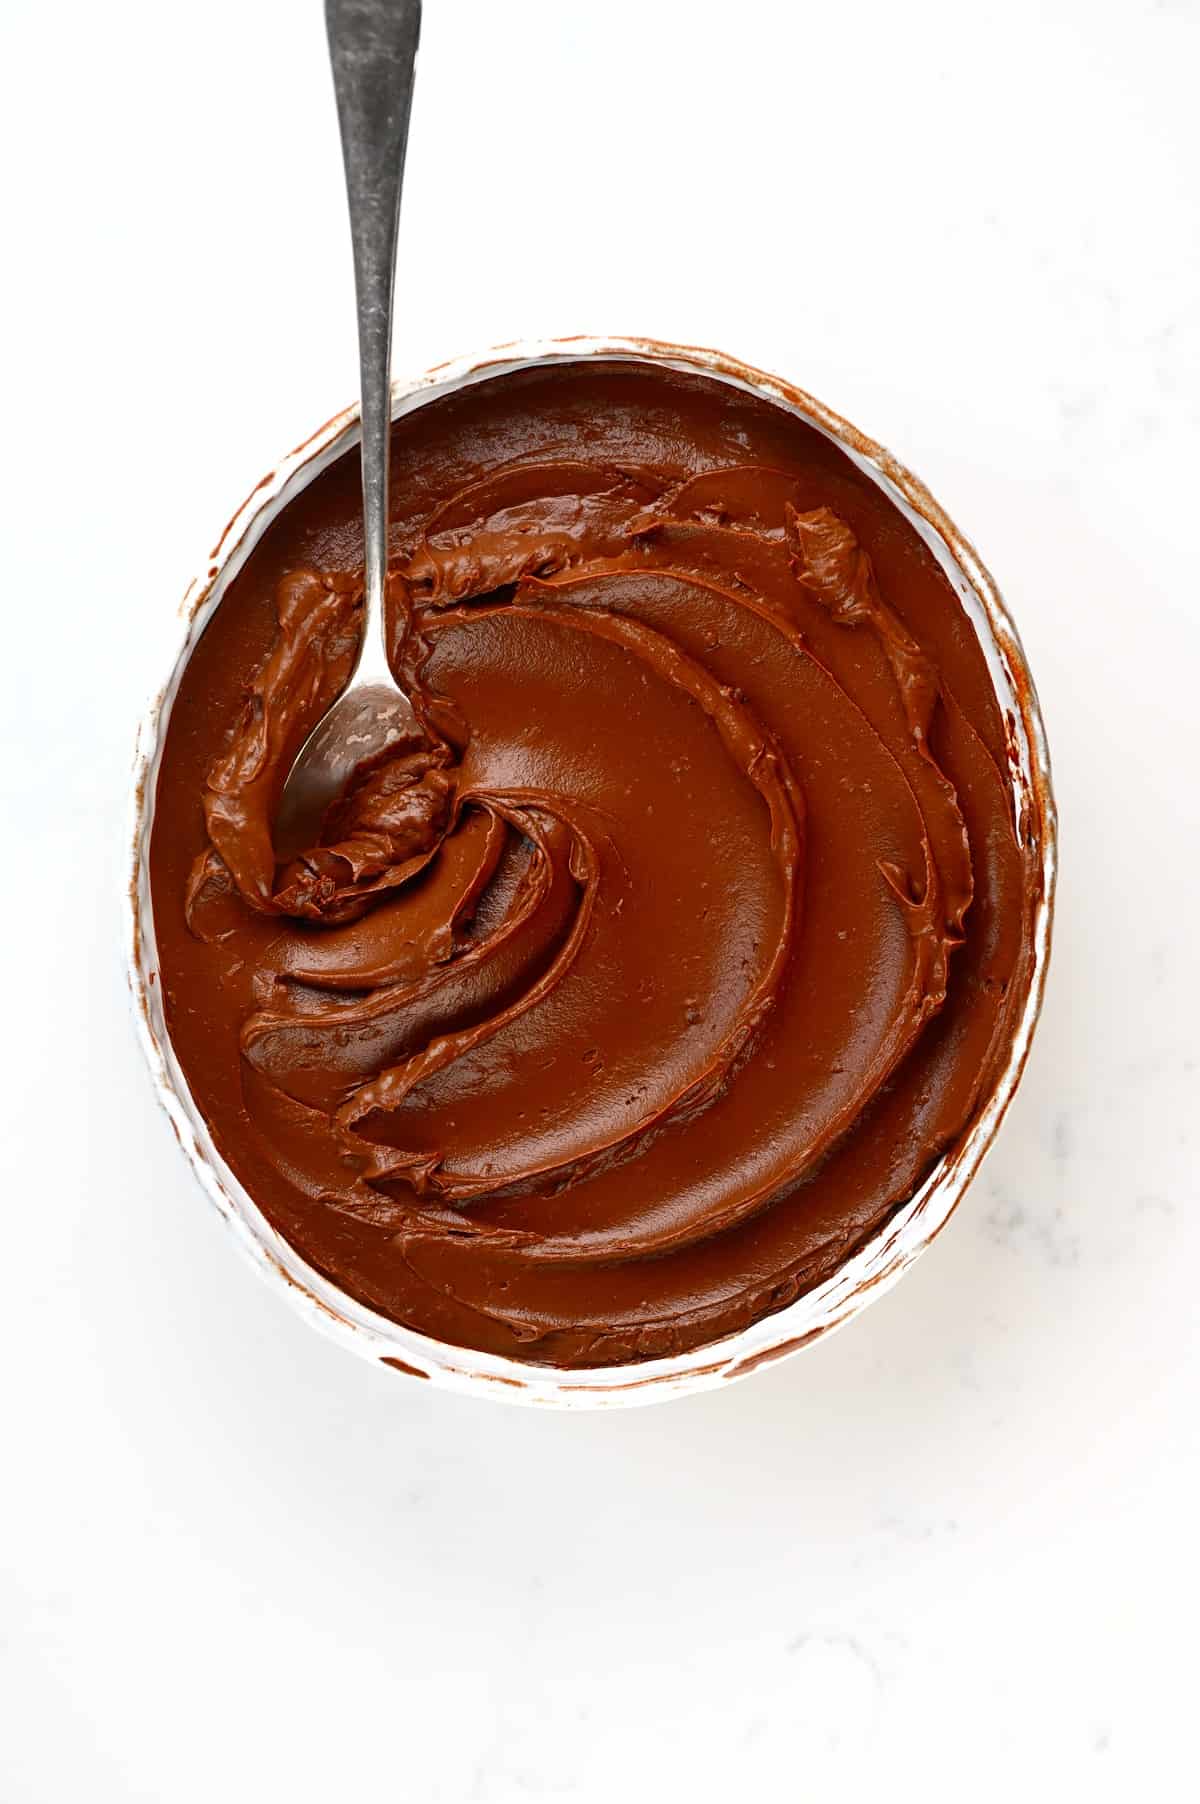 A bowl of Chocolate Pastry Cream